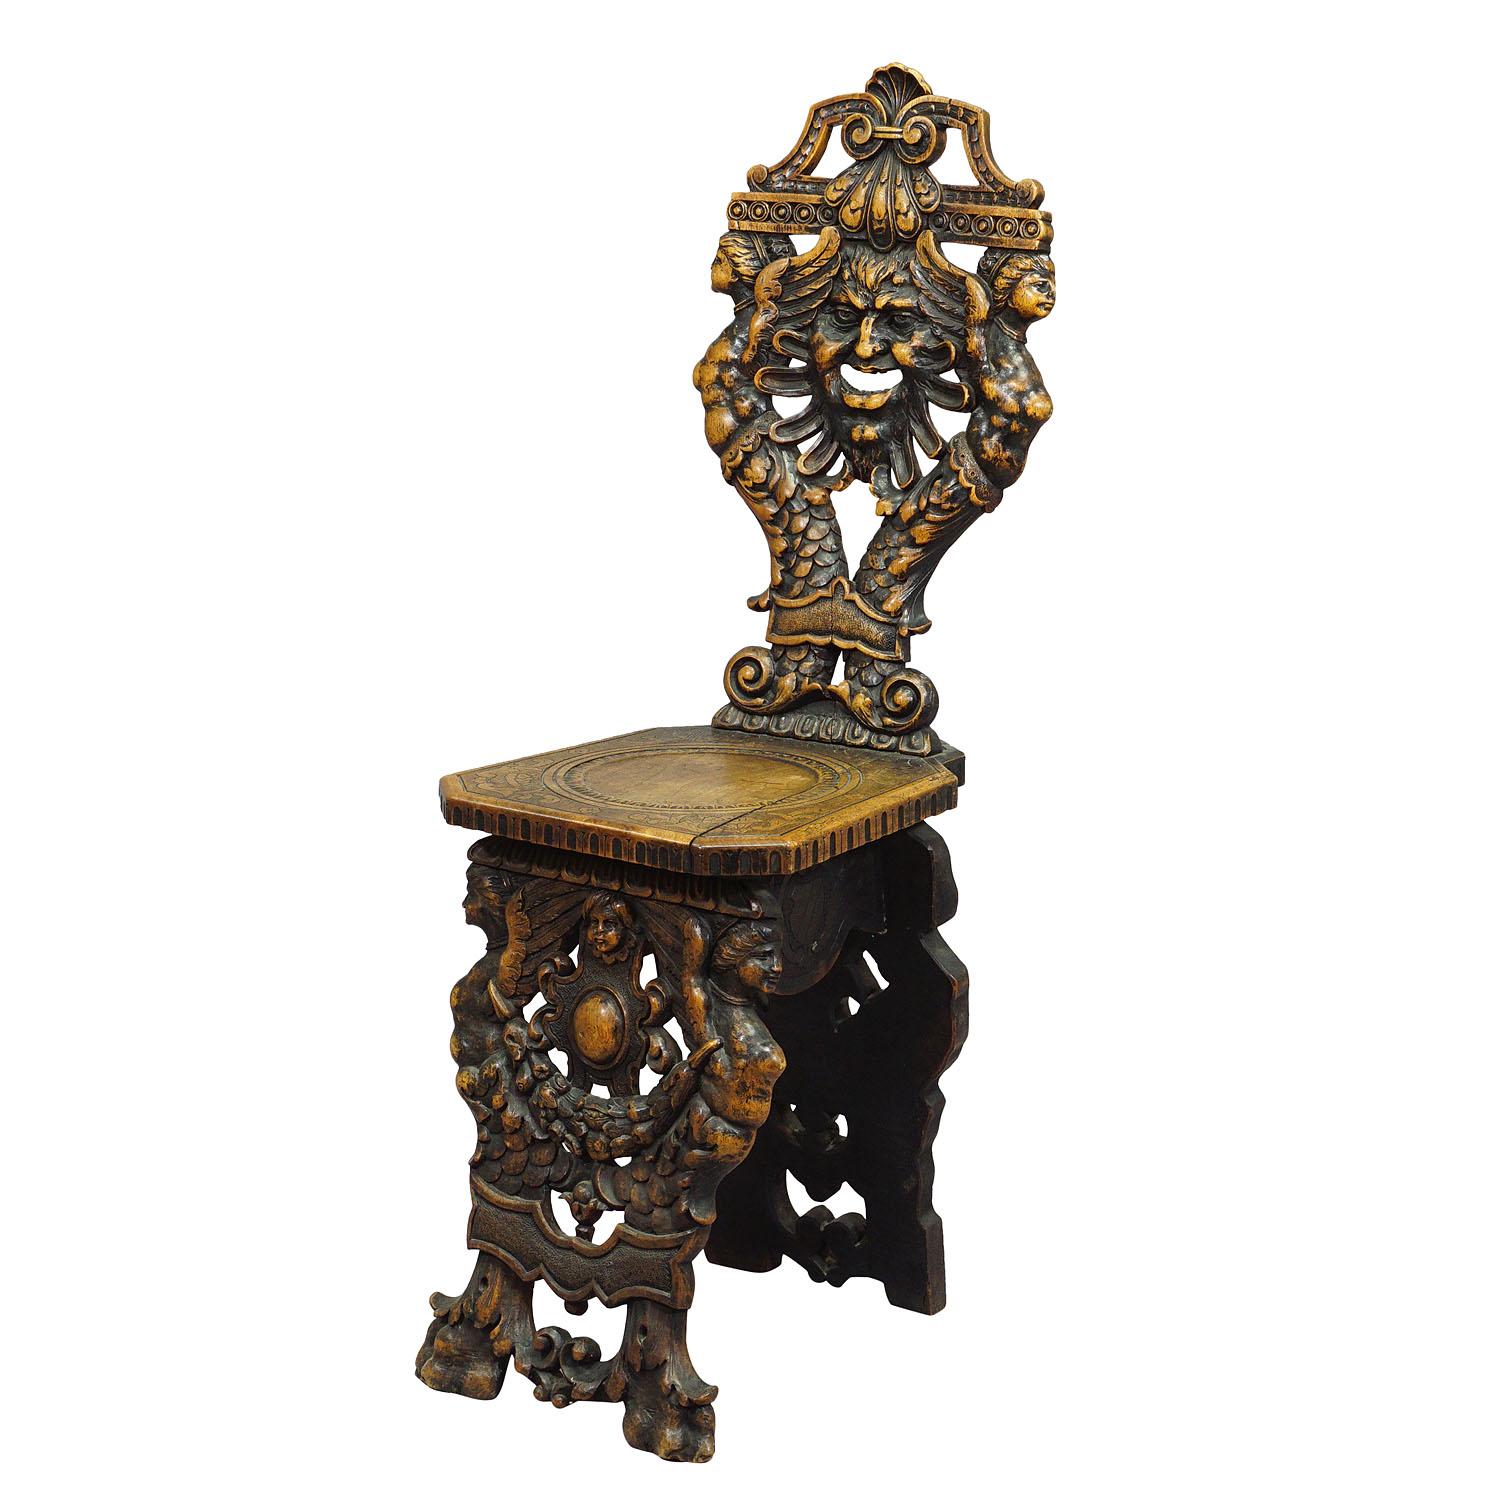 A wonderful handcarved oak wood sgabello board chair - backrest and feet carved in Renaissance style with fantastic grimace, gargoyle and floral carvings, Italy ca. 1860.

Measures: width: 13.39